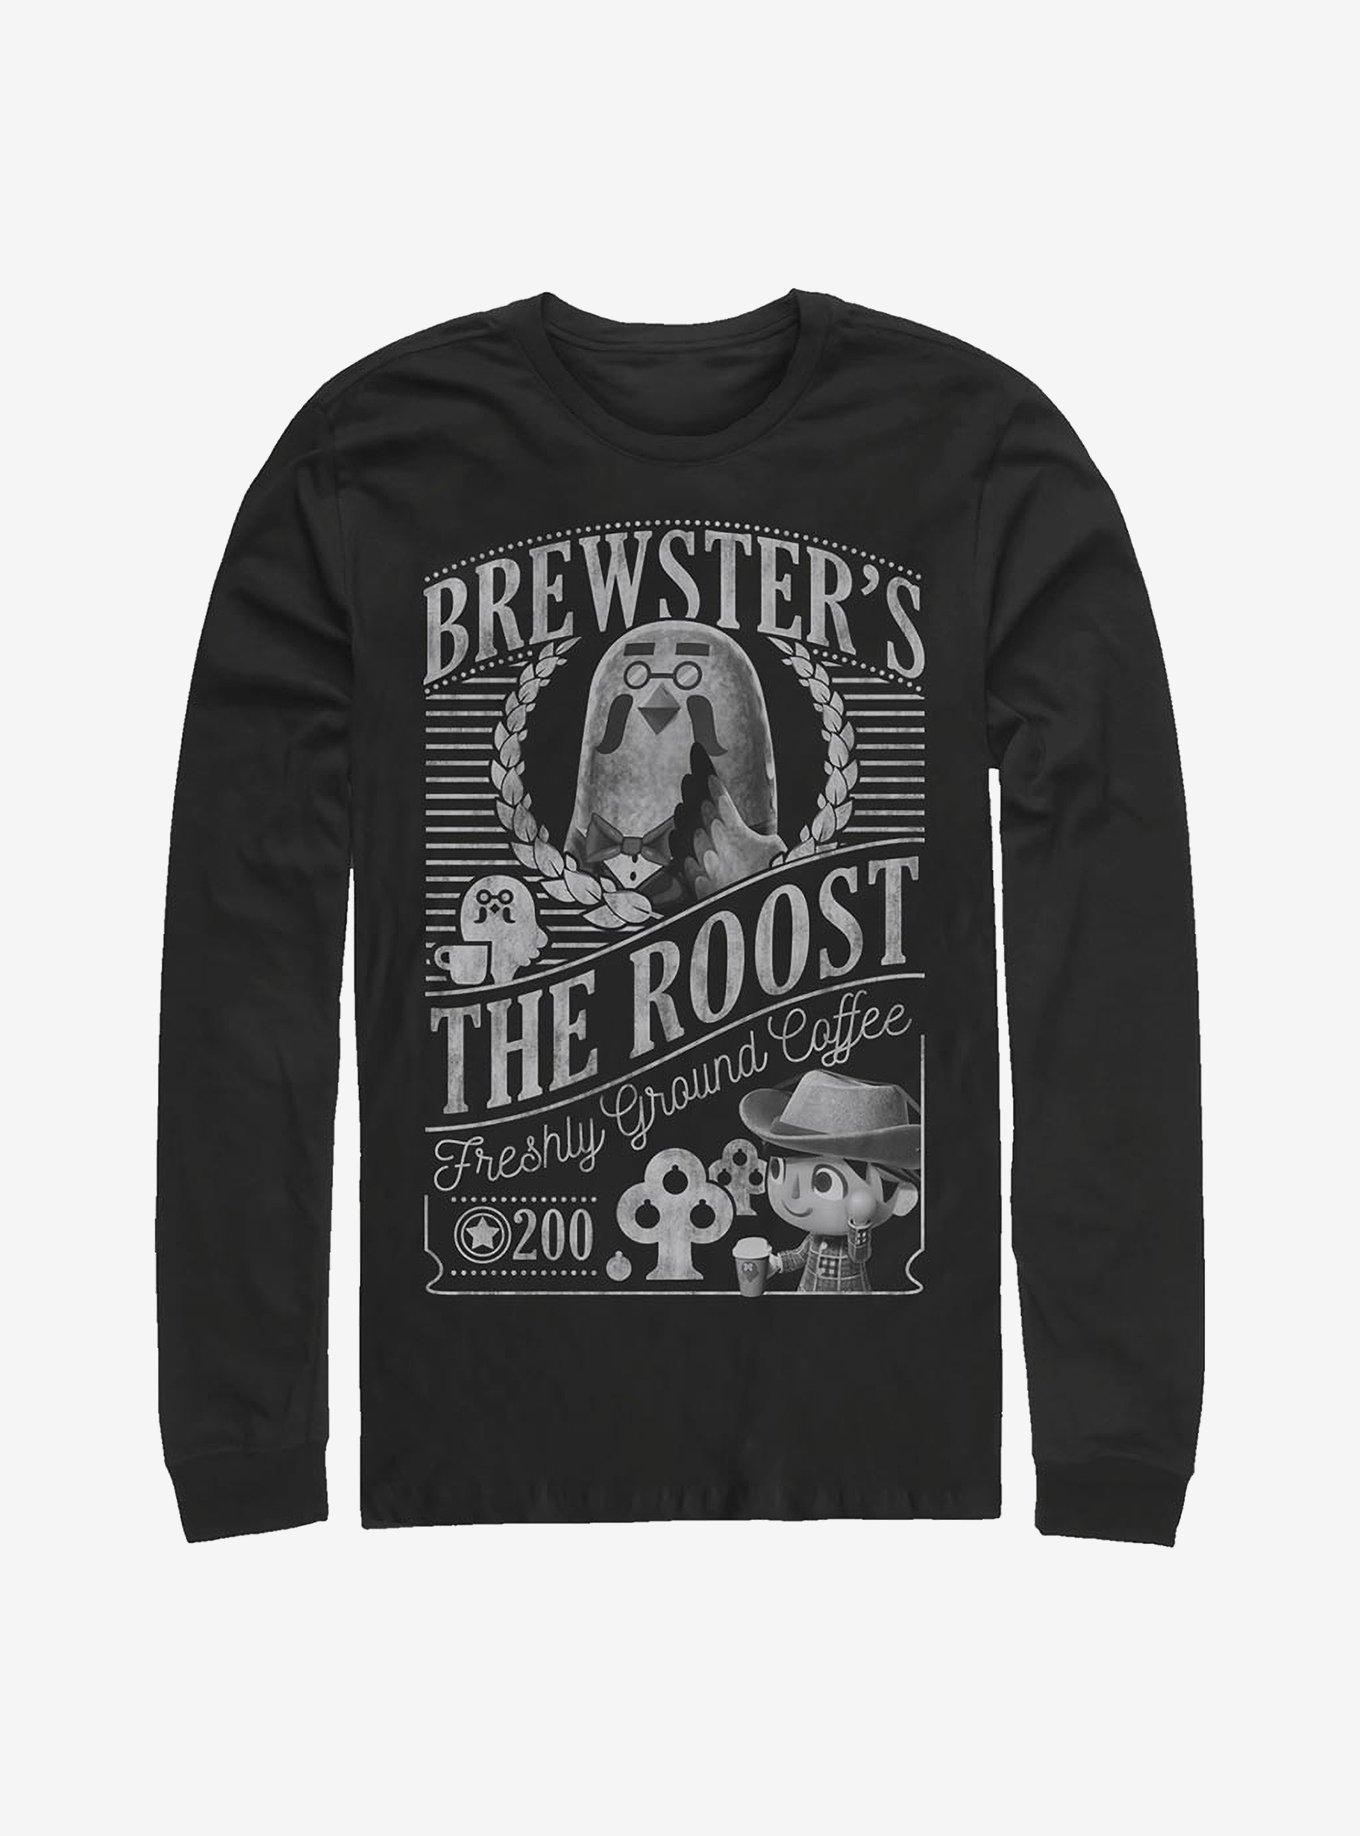 Animal Crossing Brewster's Cafe The Roost Long-Sleeve T-Shirt, BLACK, hi-res